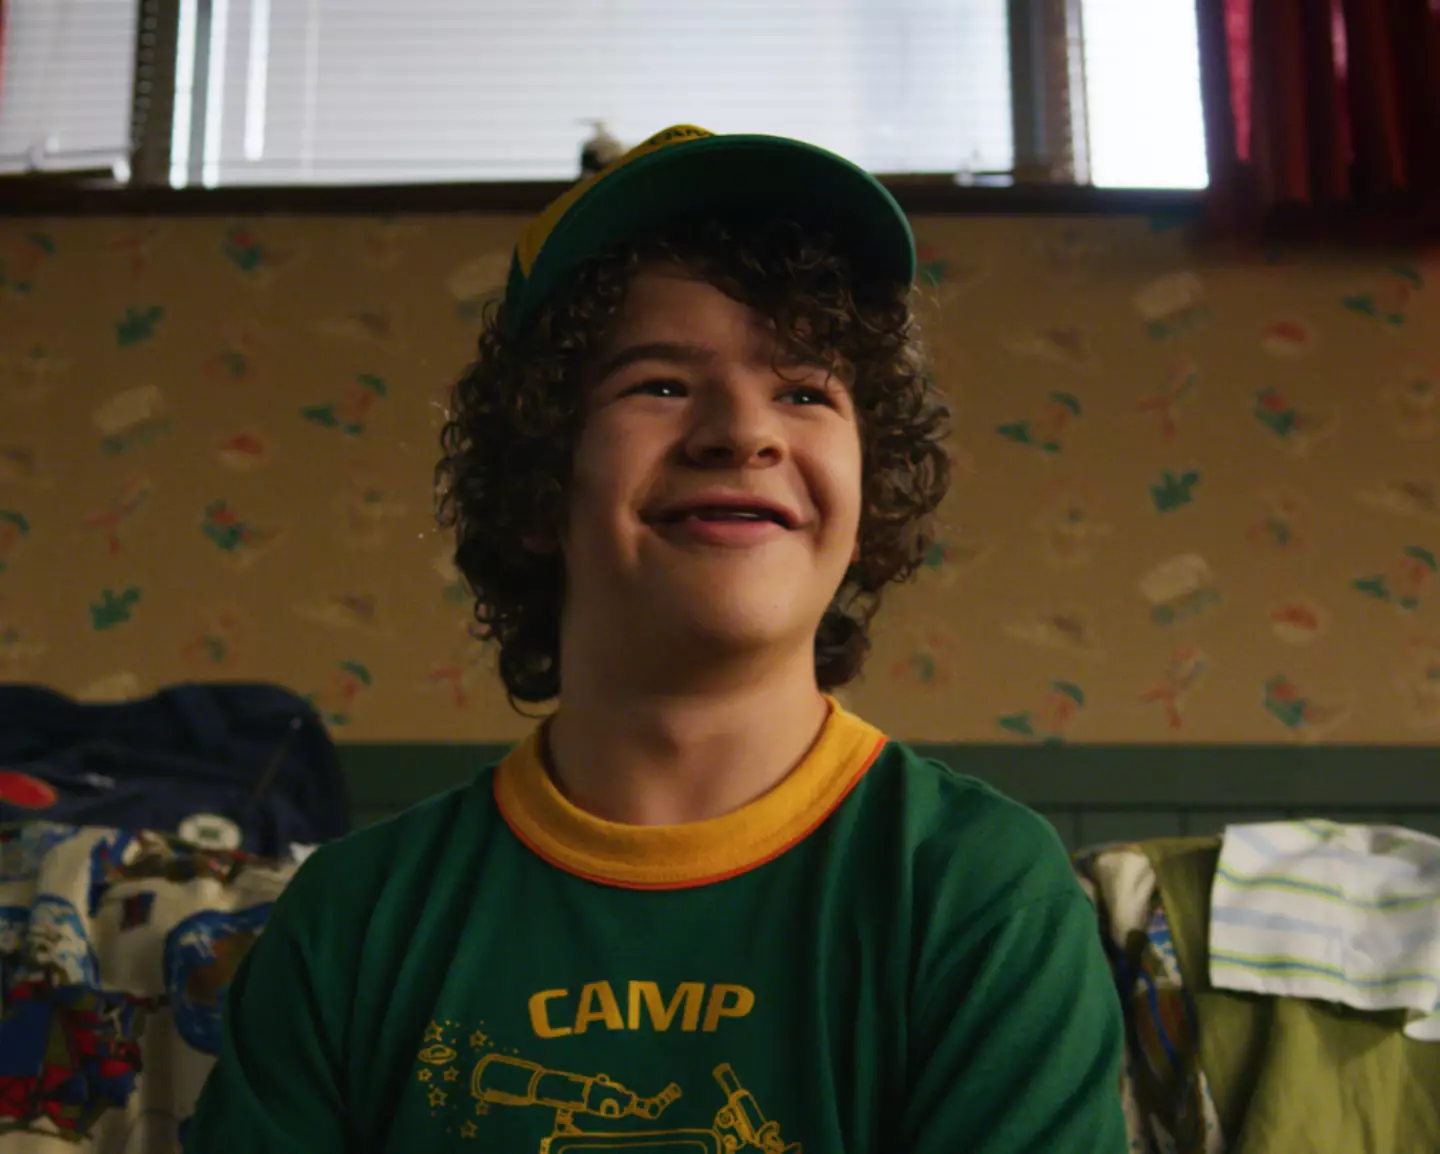 Gaten Matarazzo spoke about his condition at his Stranger Things audition.